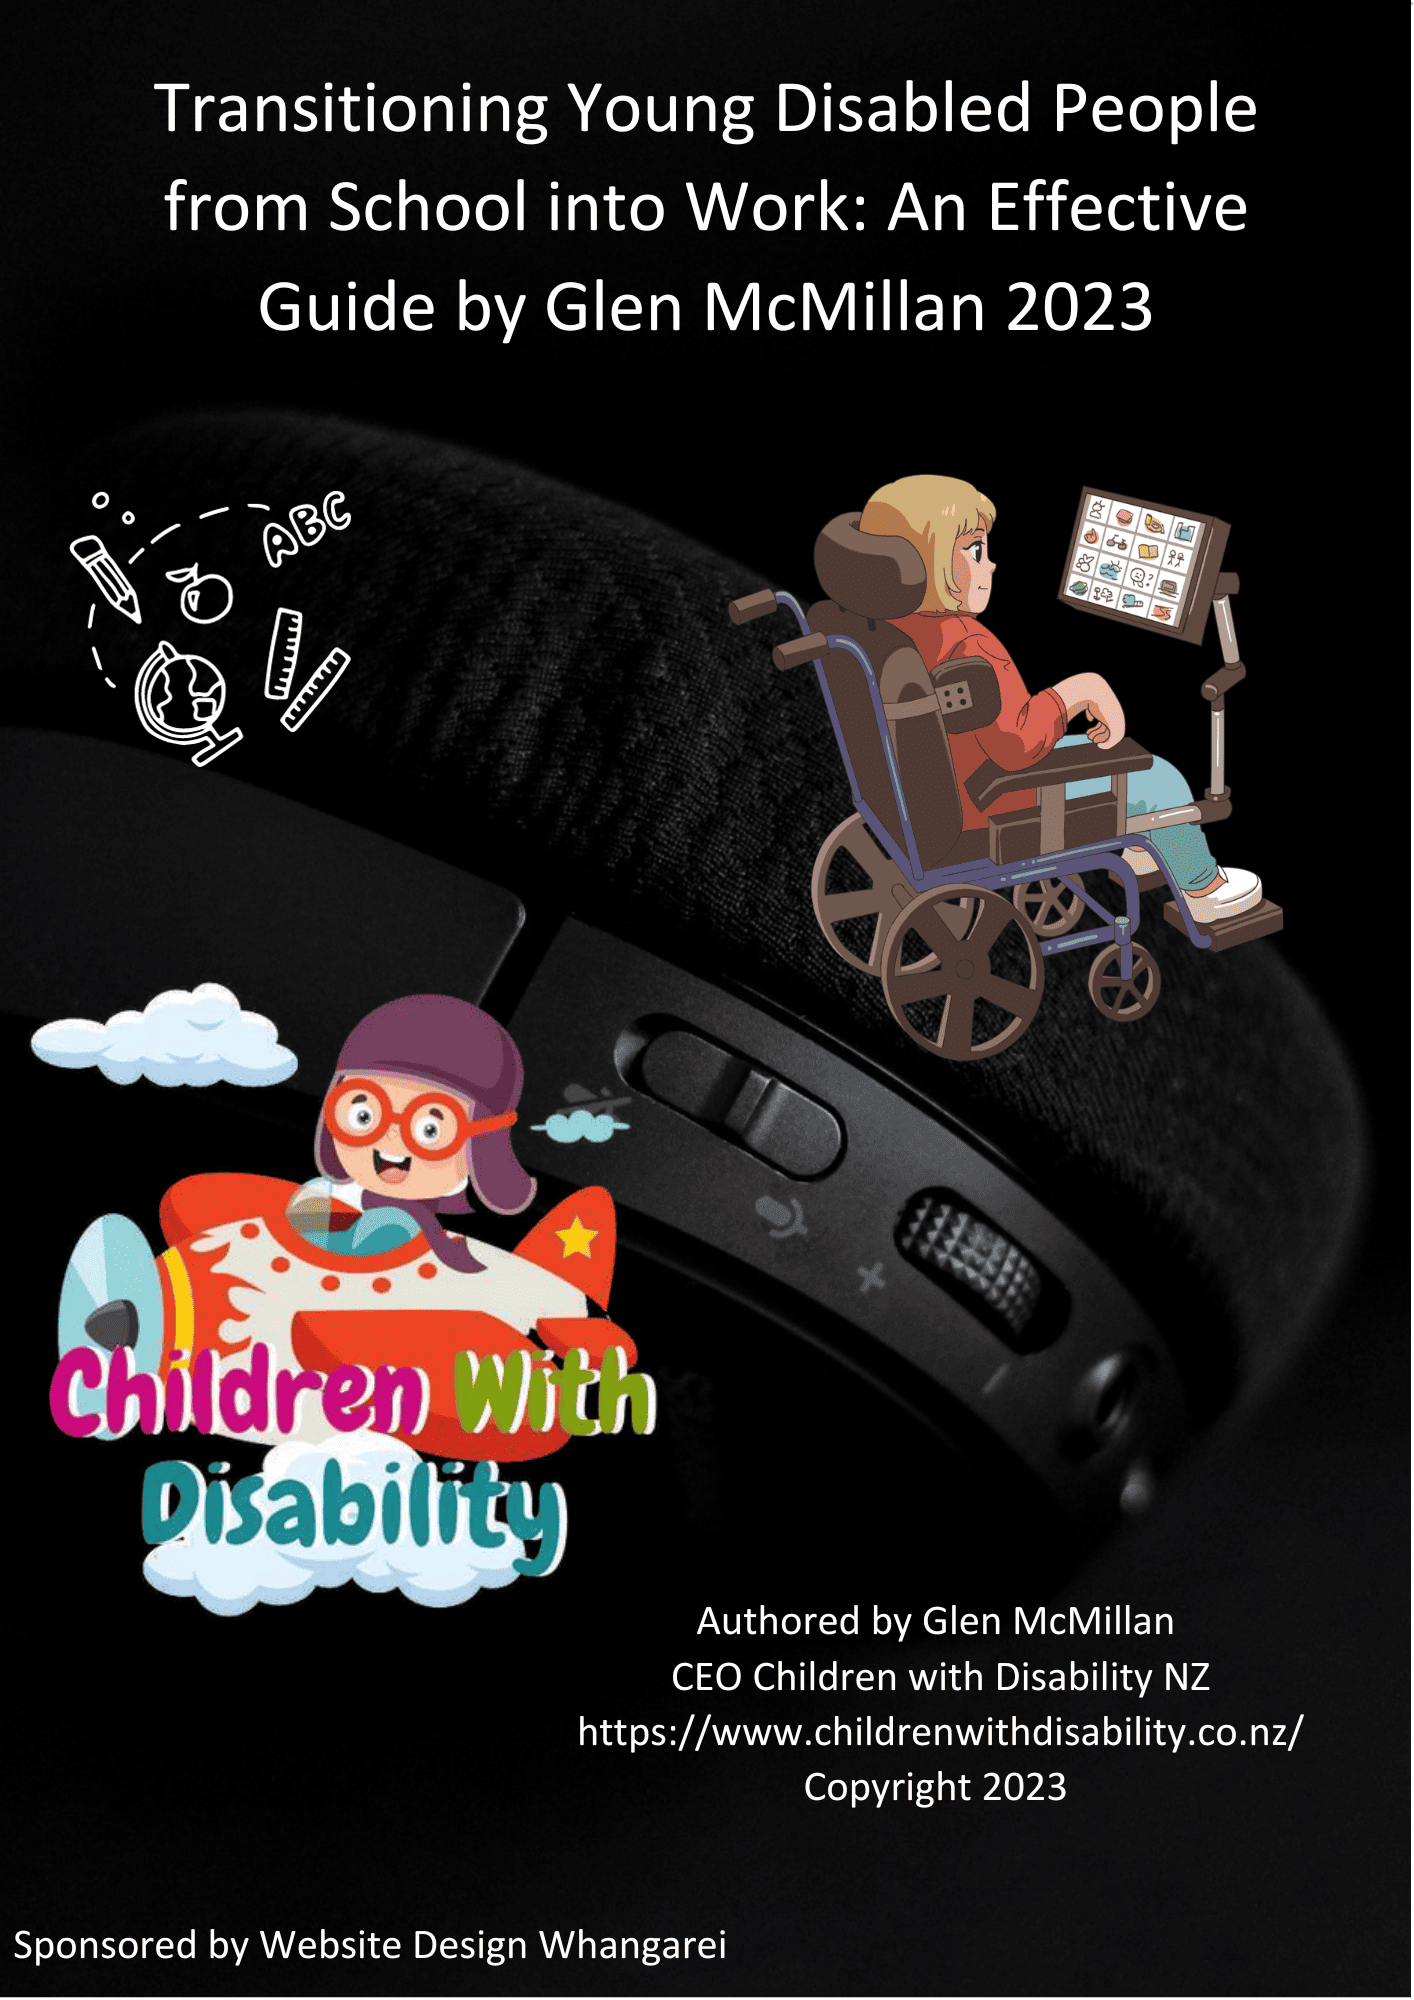 Transitioning young disabled people into the workforce. An effective guide by Glen McMillan